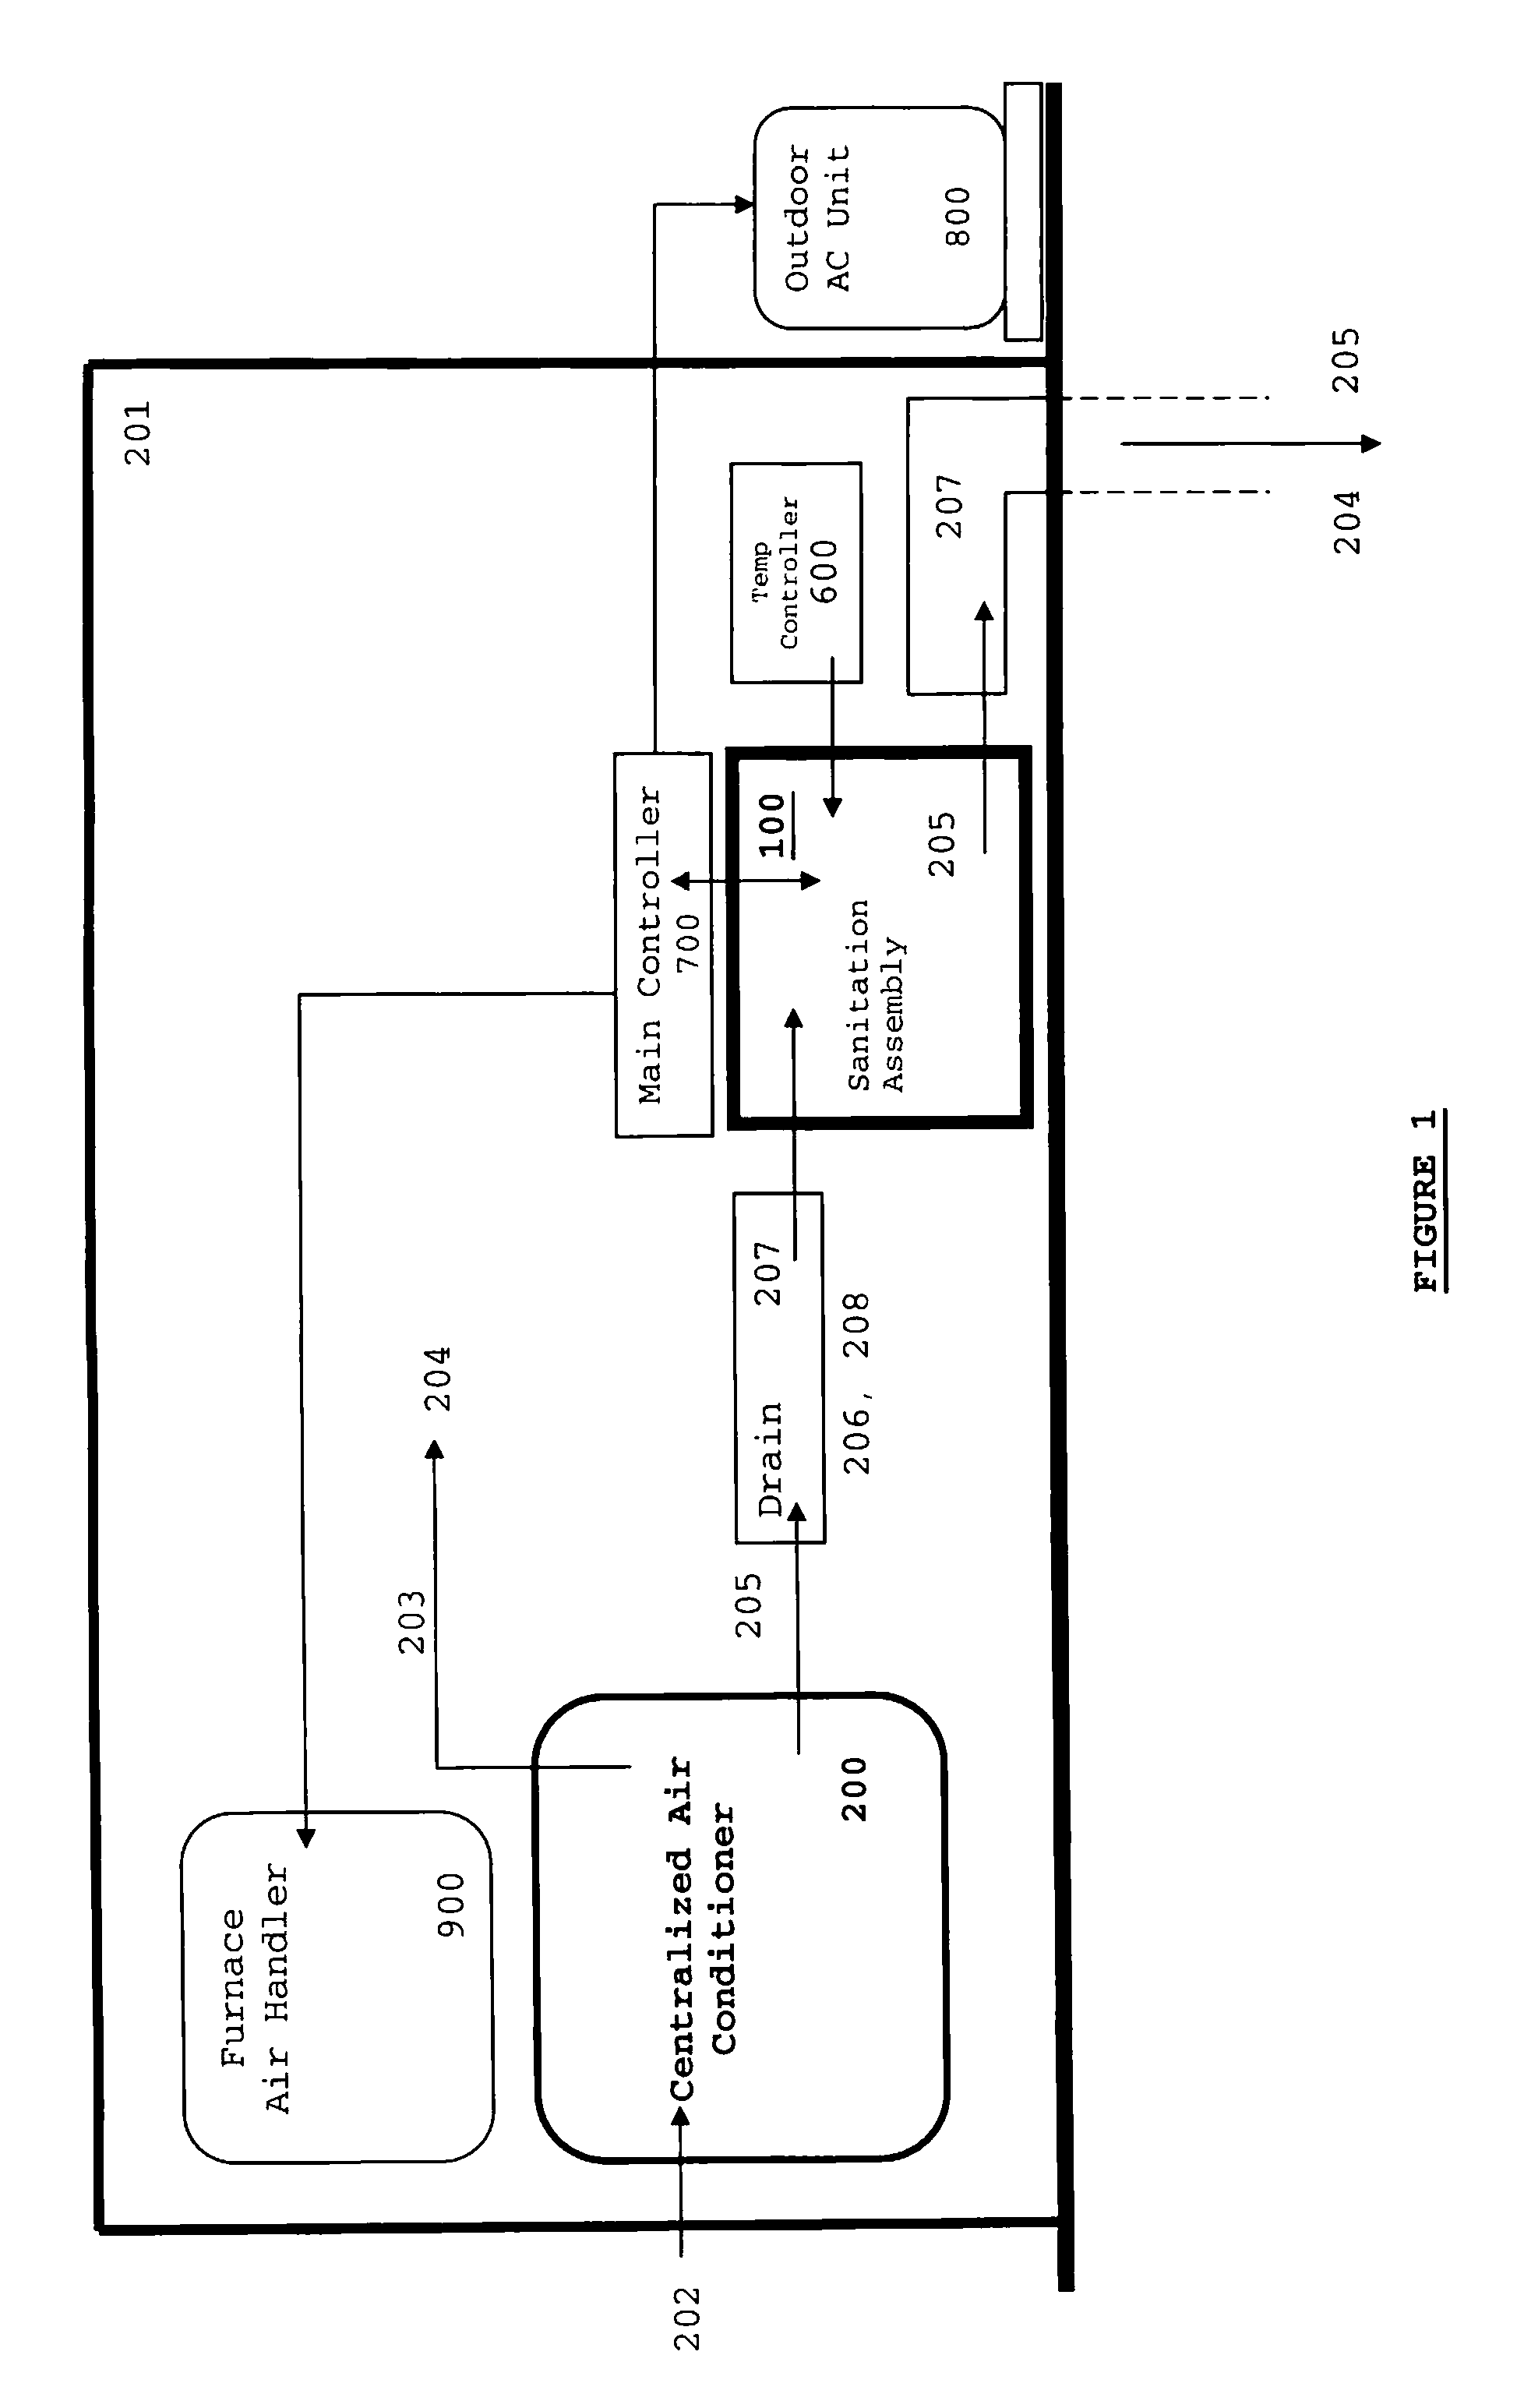 Self-sanitizing automated condensate drain cleaner and related method of use